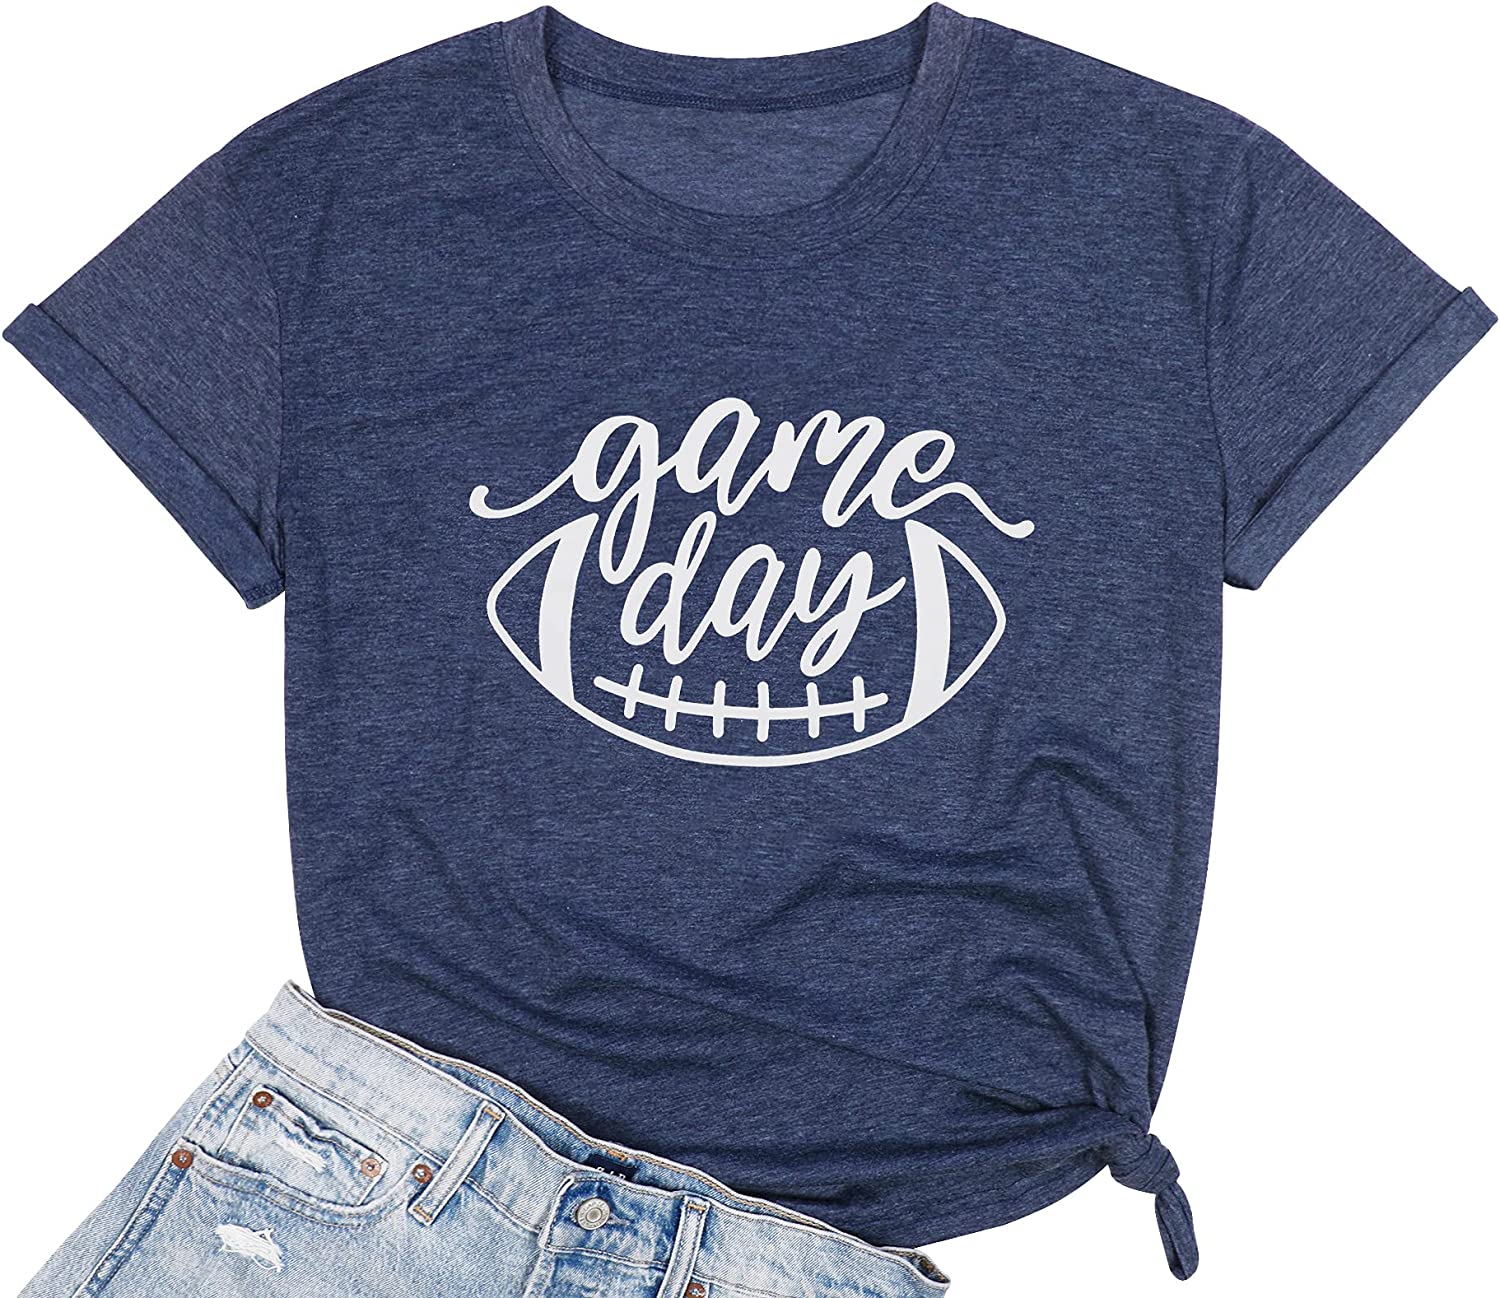 Trendy Game Day Football T Shirts for Women Funny Football Graphic Tees  Casual Funny Sunday Short Sleeve Tops Workout at  Women's Clothing  store